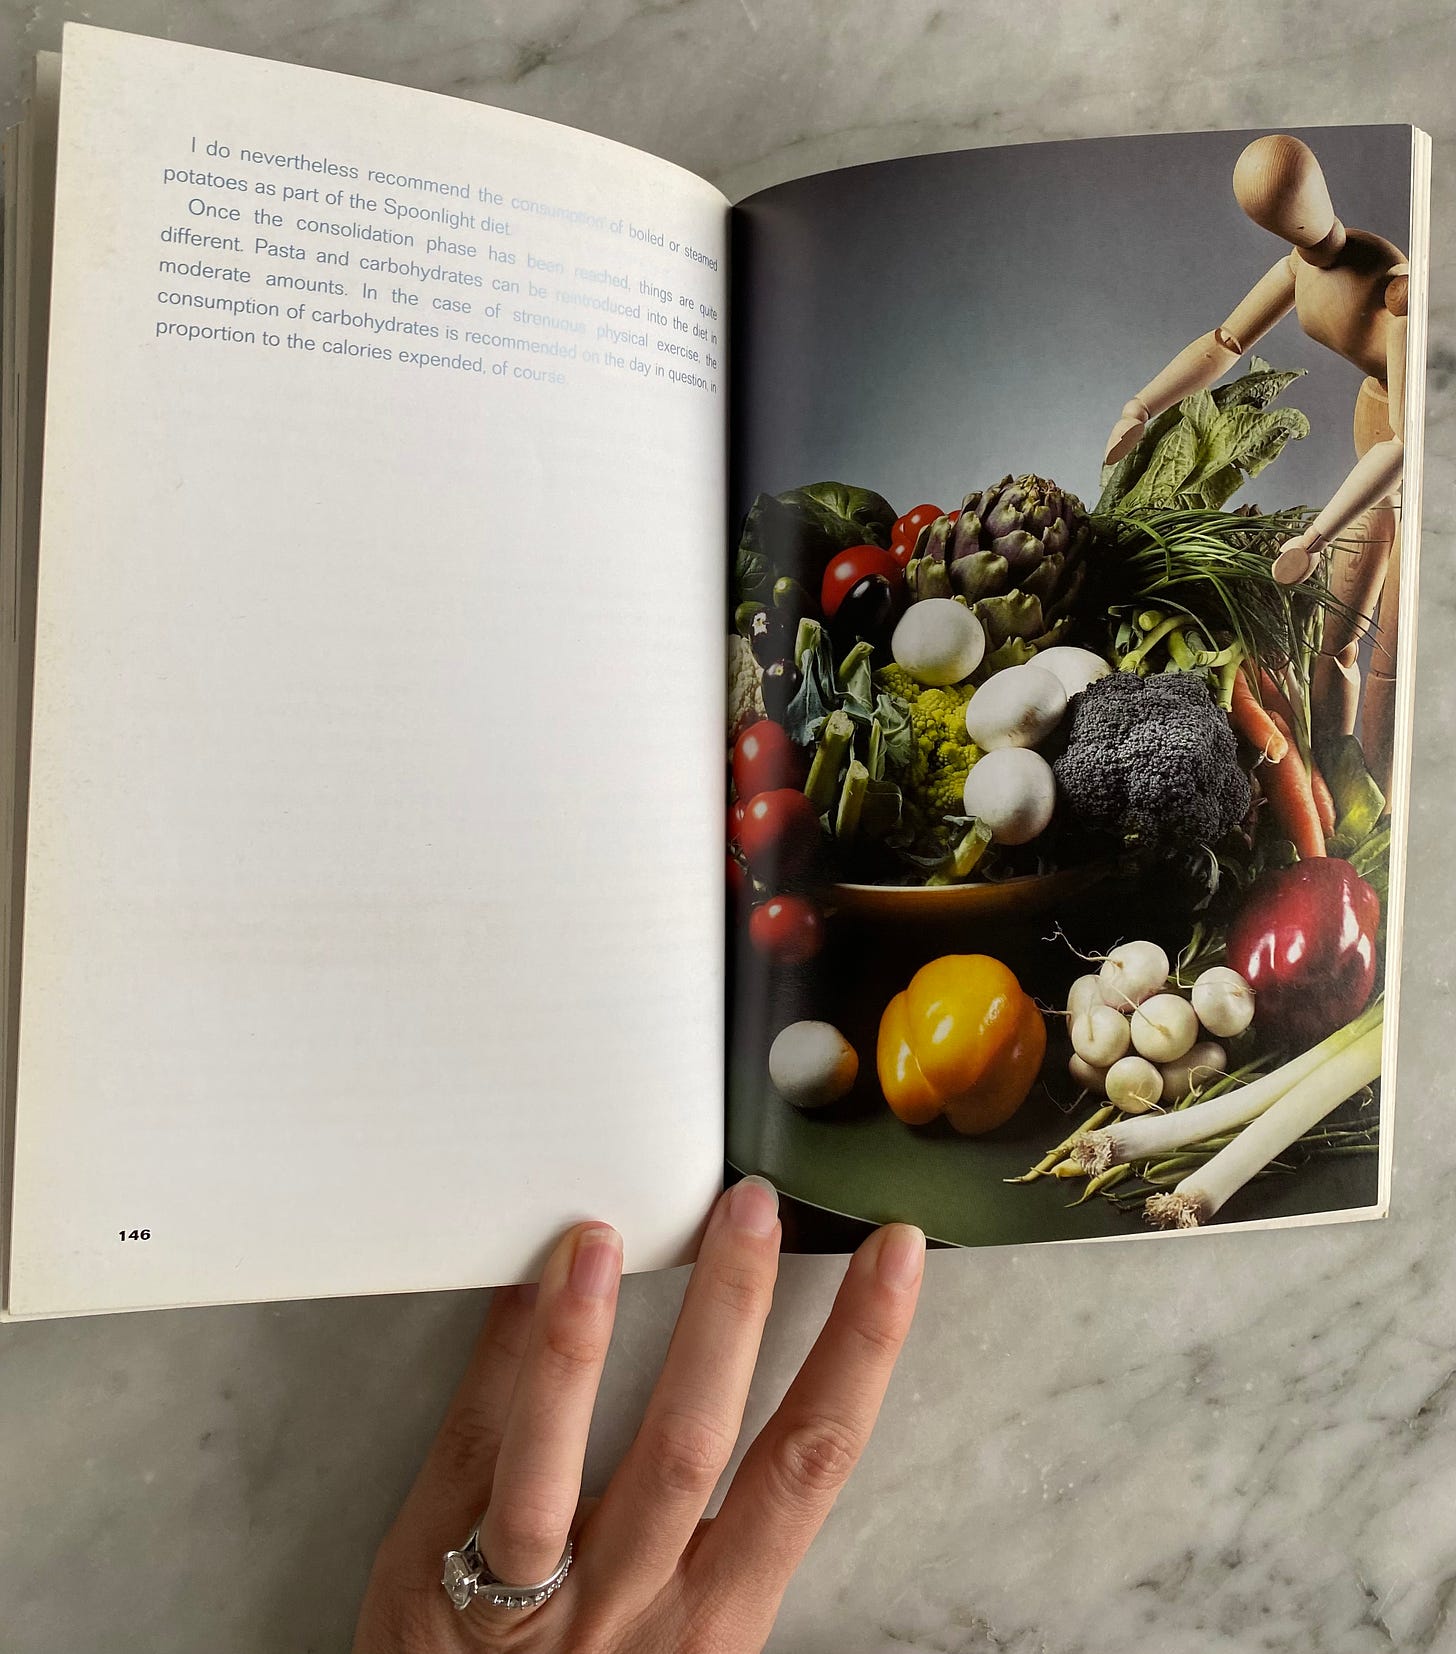 Karl Lagerfeld's Diet Book Offers Unhealthy Advice, Disgusting Recipes